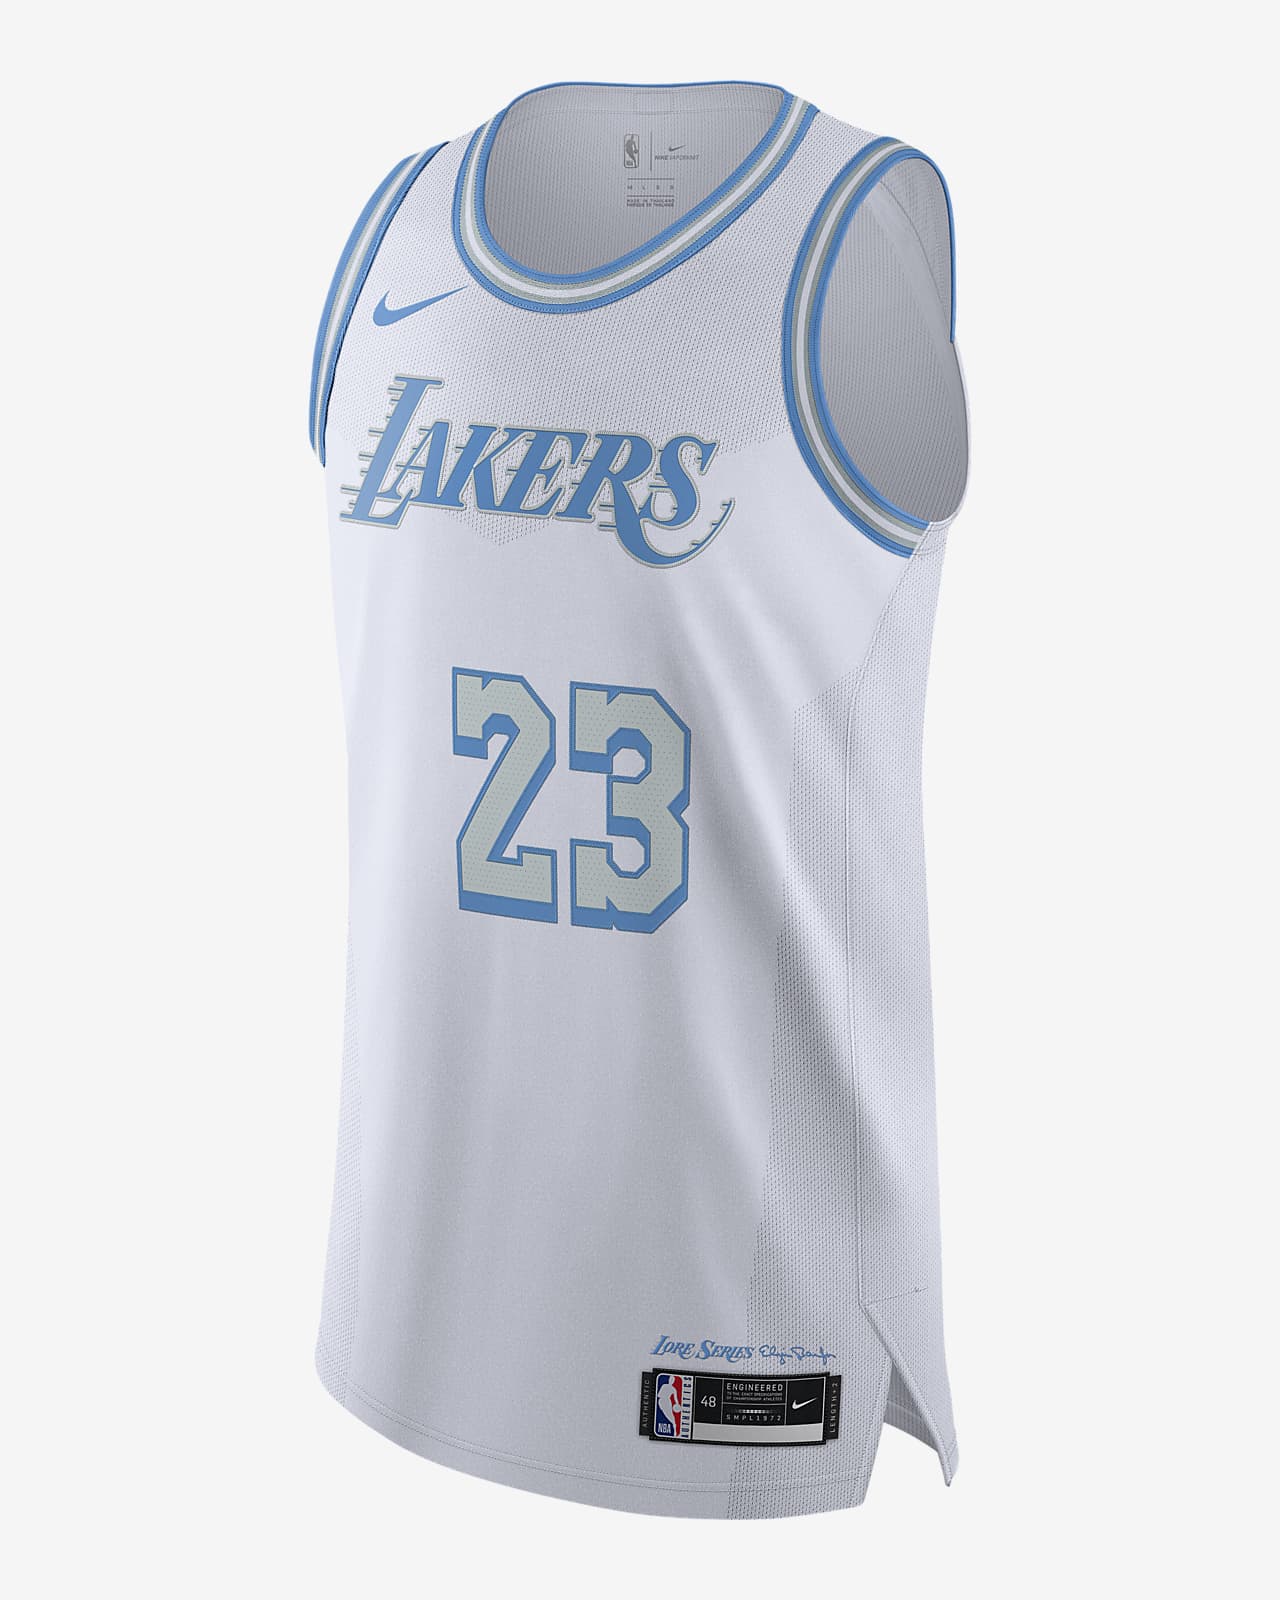 Camiseta Nike NBA Authentic Los Angeles Lakers City Edition. Nike CL